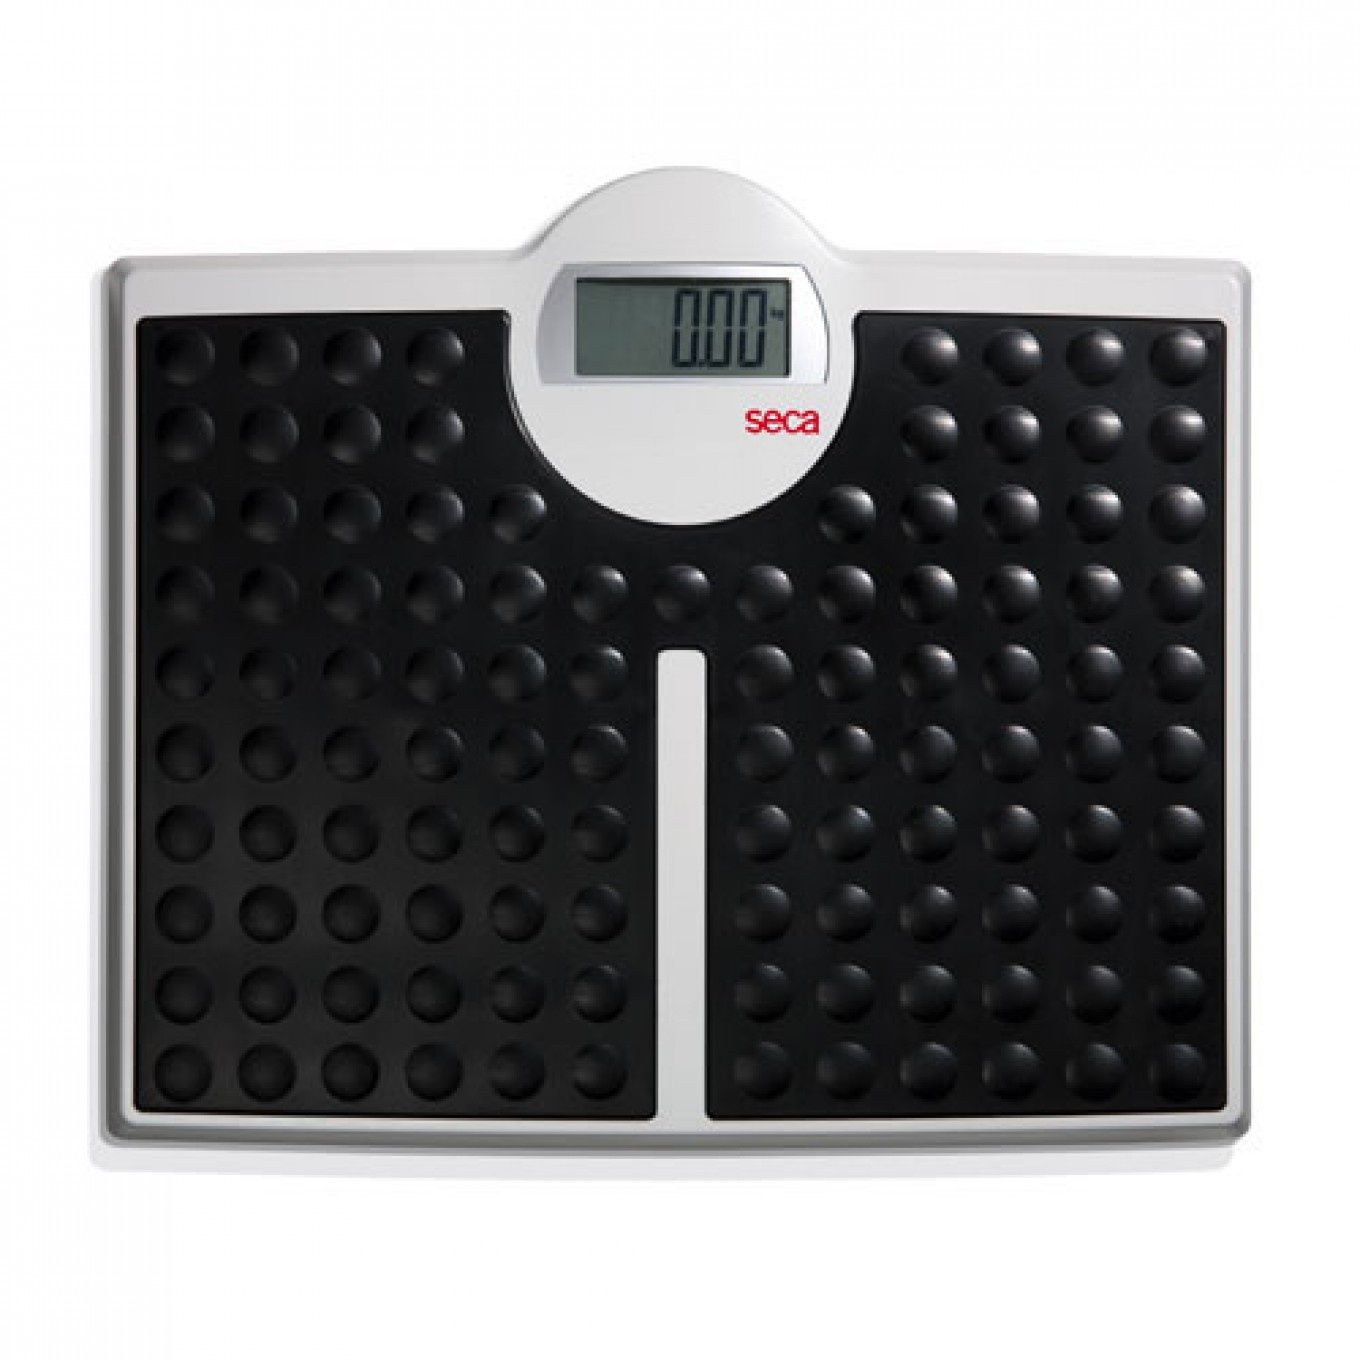 Seca Electronic Floor Scales 200kg/100g image 0